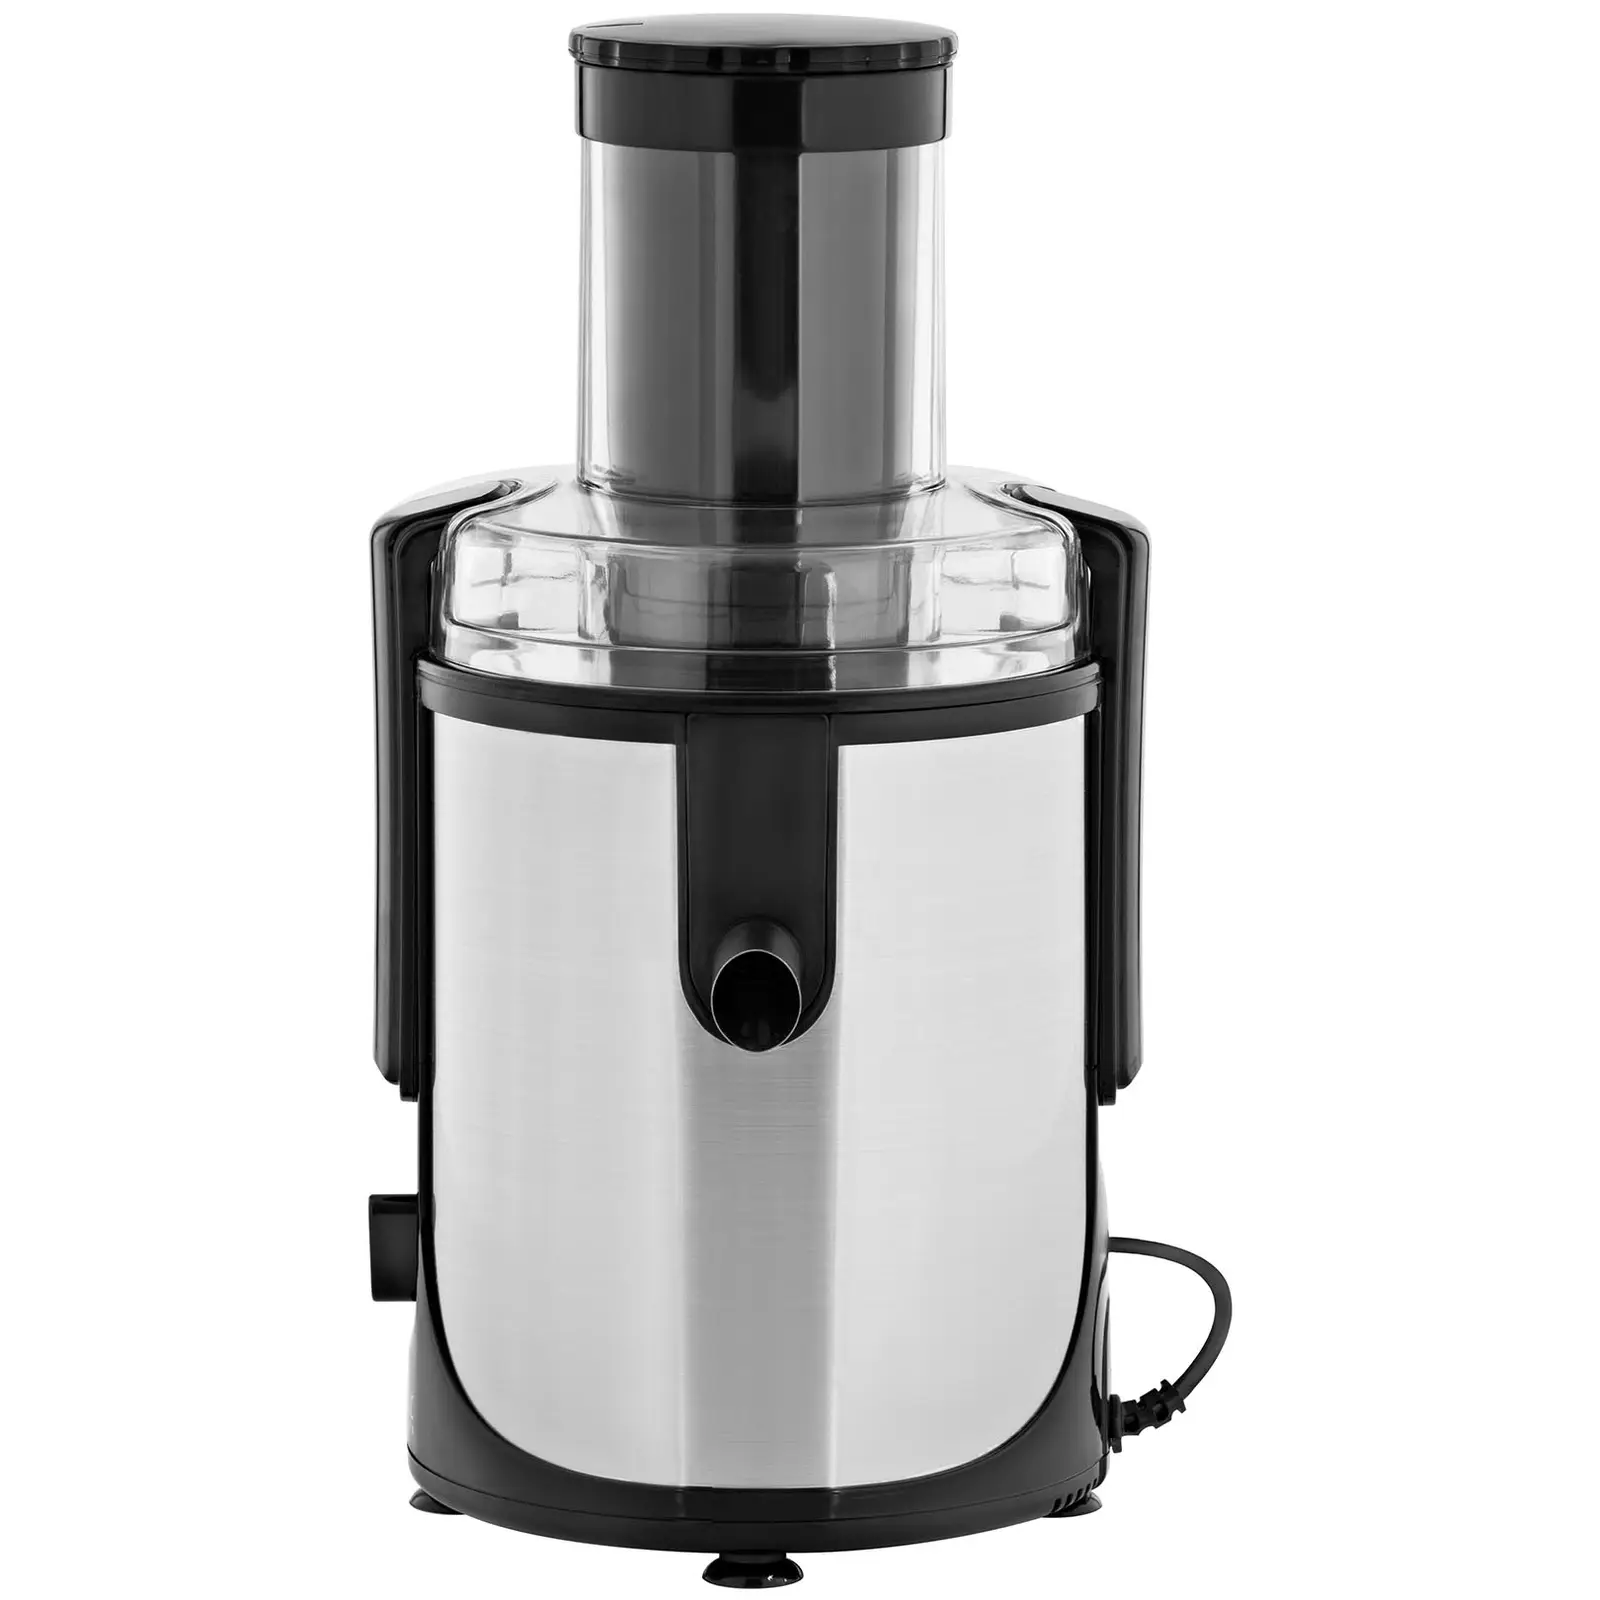 Extracteur jus - 1,200 W - Royal Catering